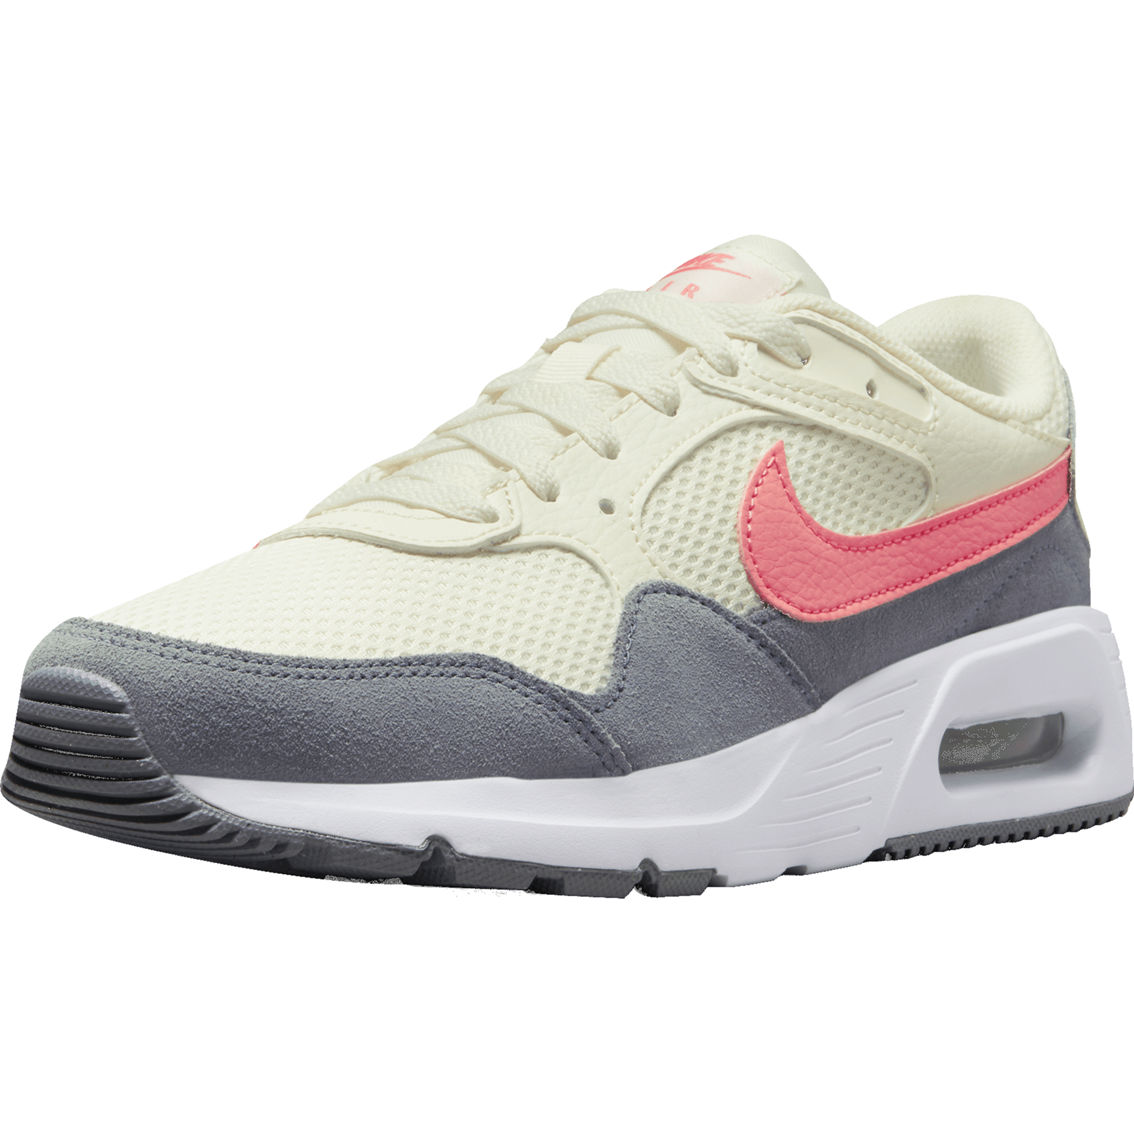 Nike Women's Air Max Sc Running Shoes | Women's Athletic Shoes | Shoes ...